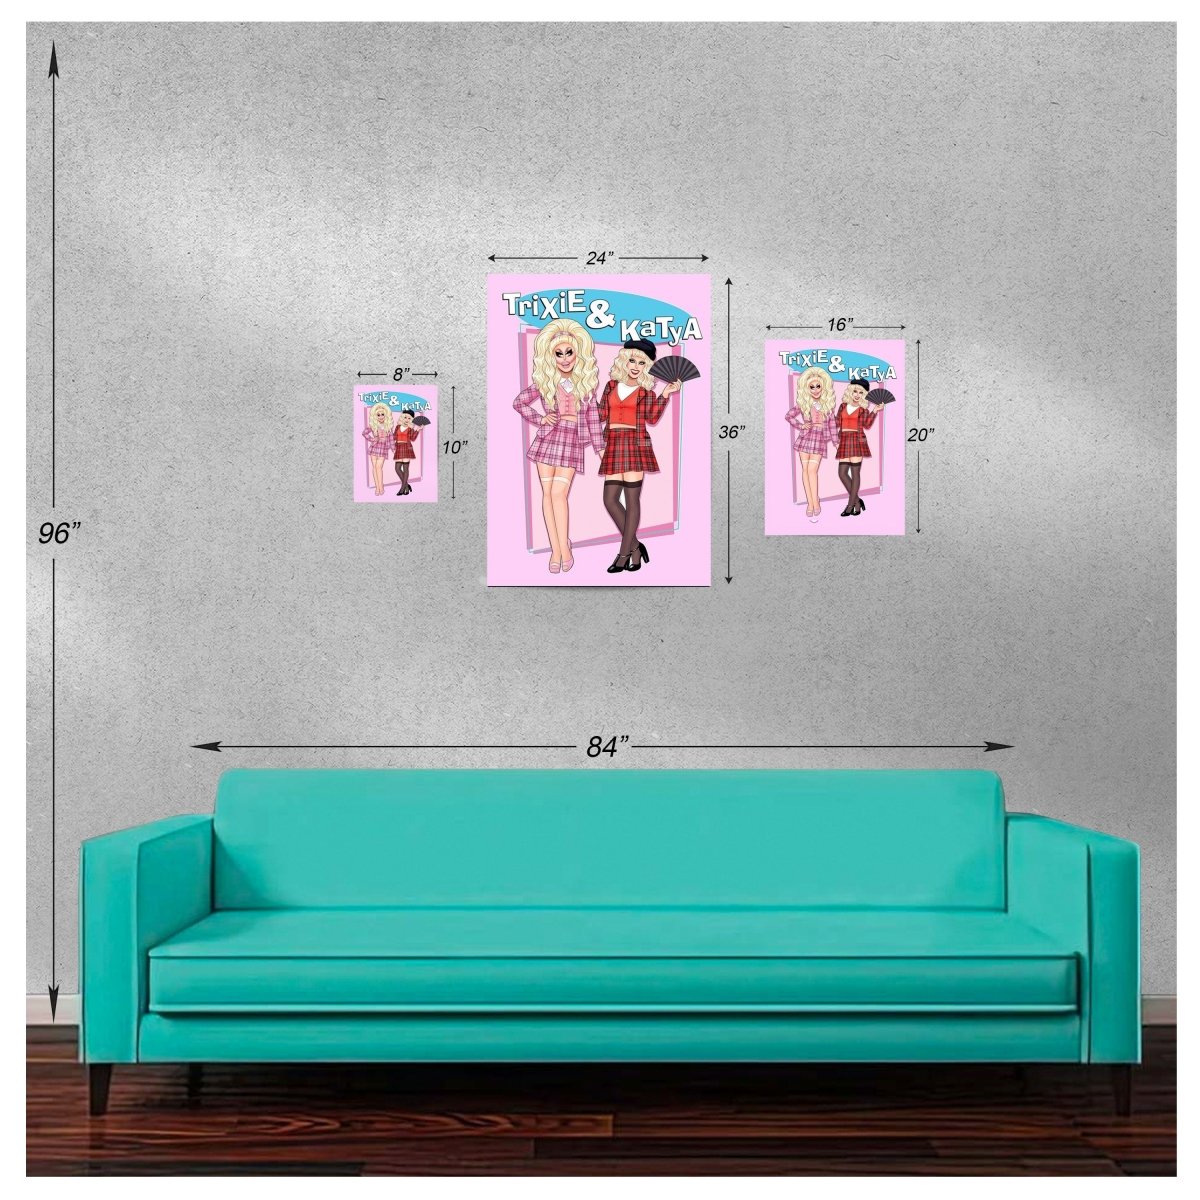 Trixie & Katya - Clueless Poster - dragqueenmerch